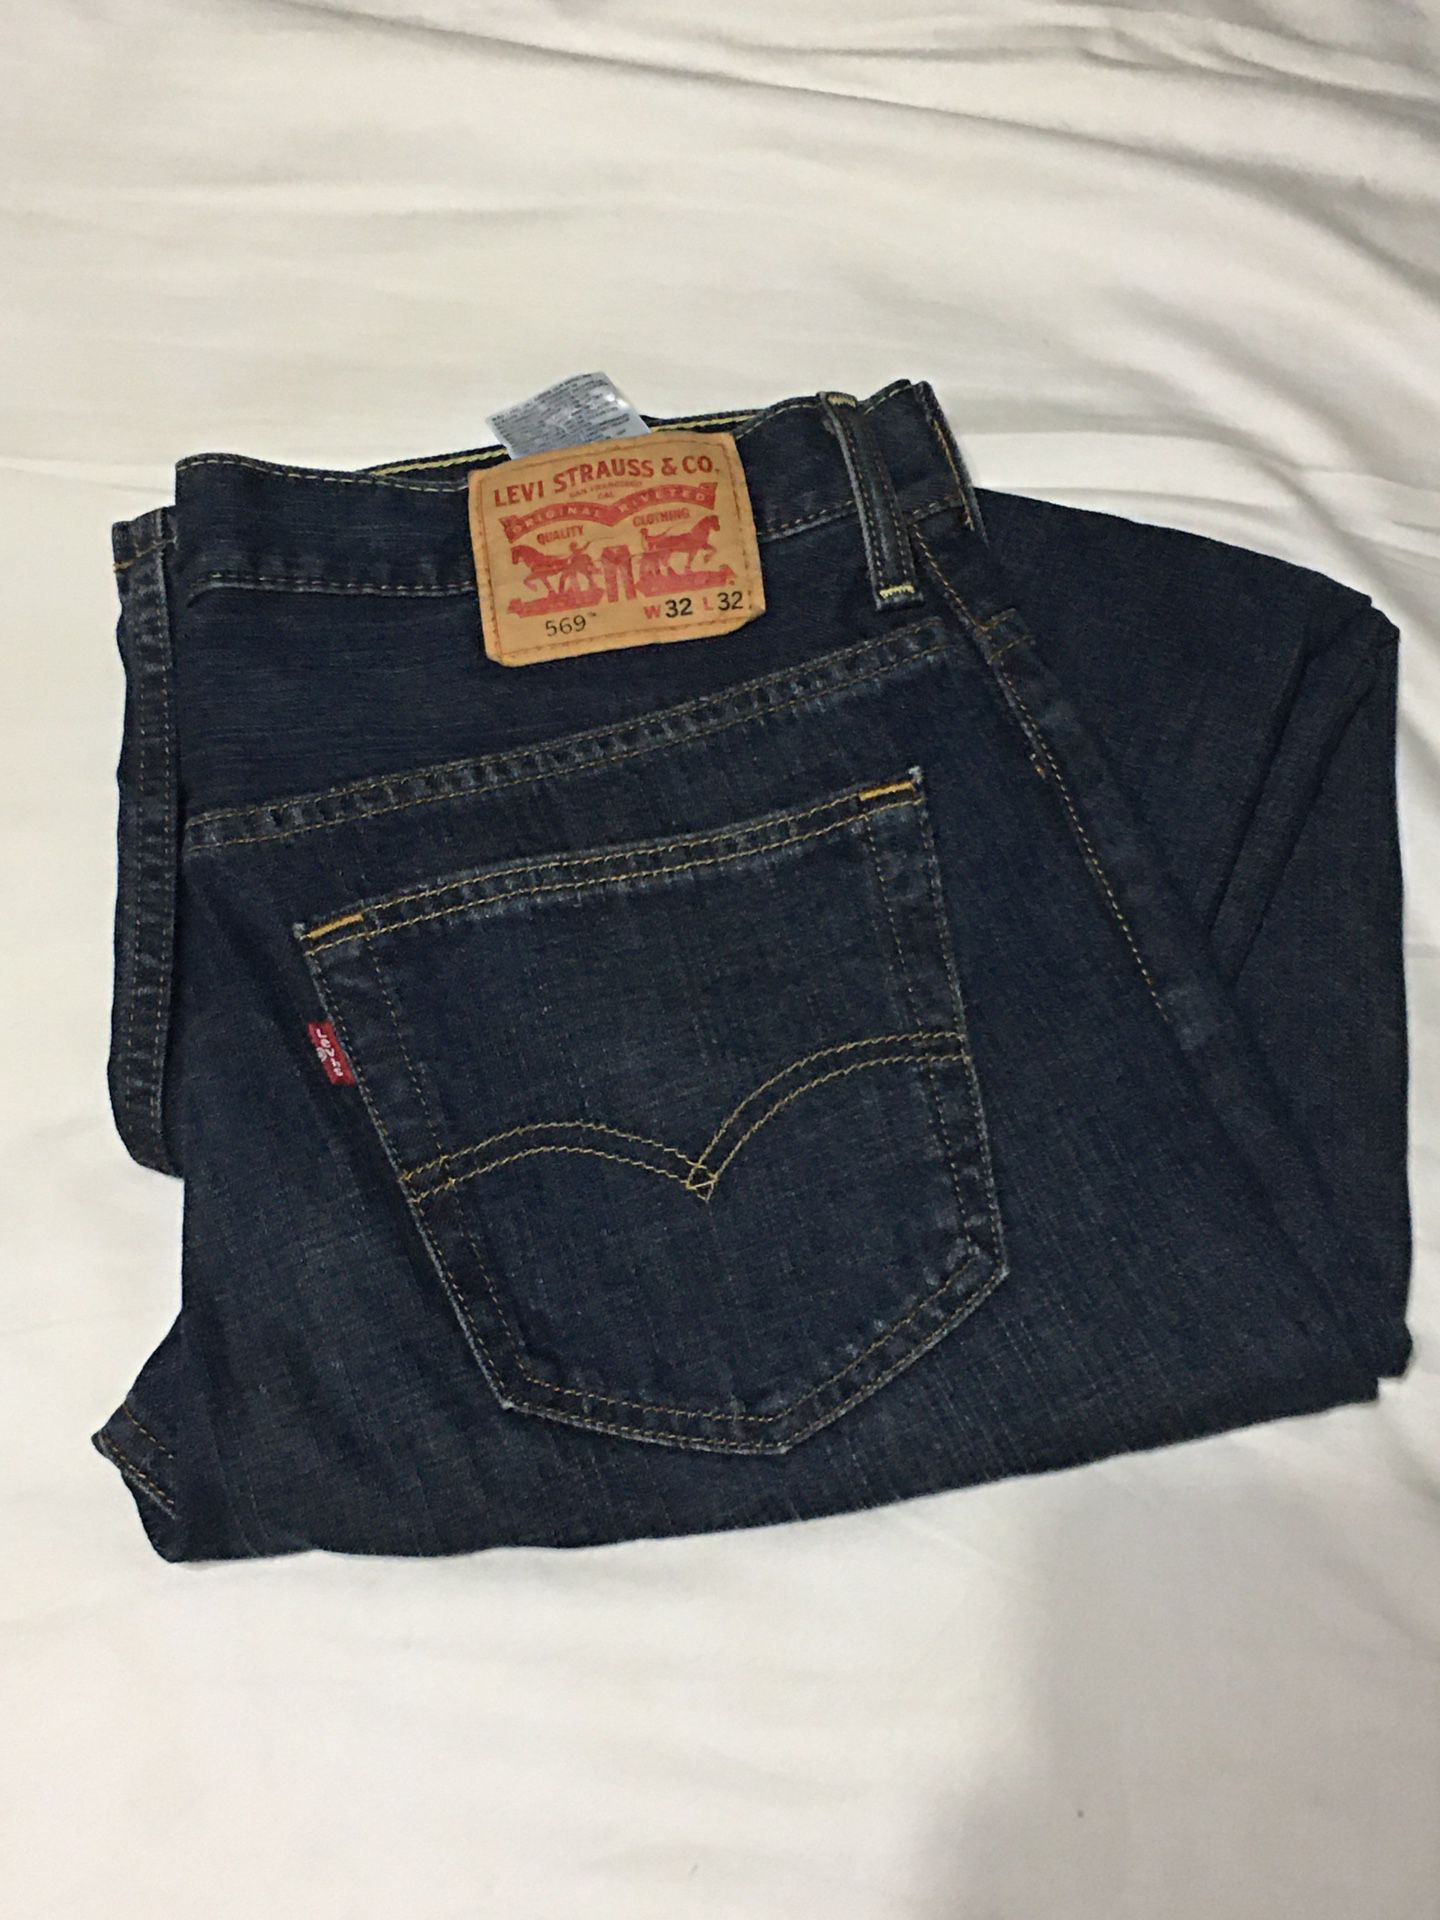 Levi Strauss And Co 569 Blue Denim Jeans - 32x32